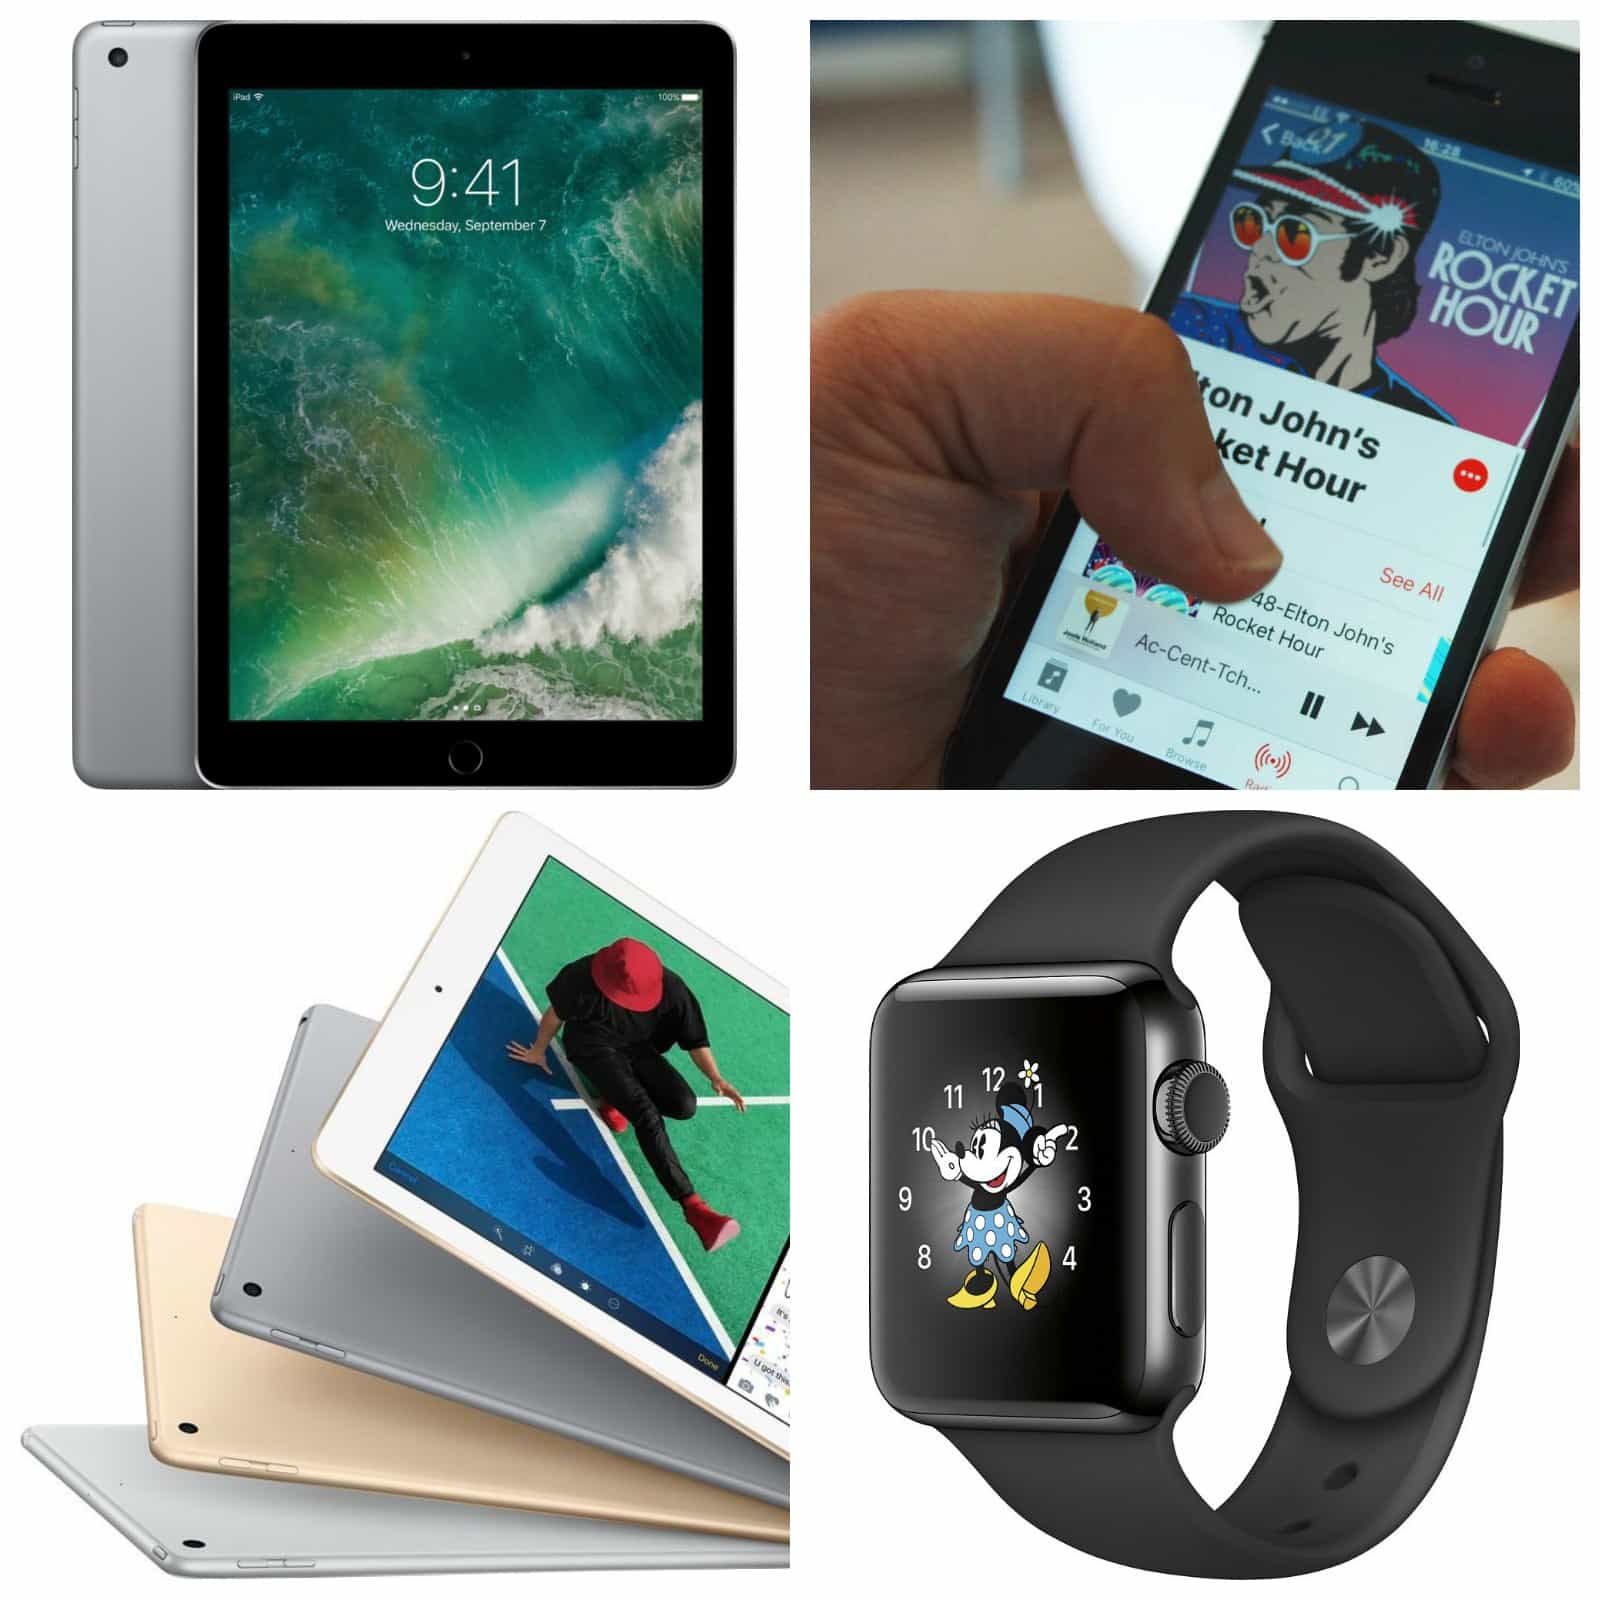 Apple deals on Apple Music and iPads